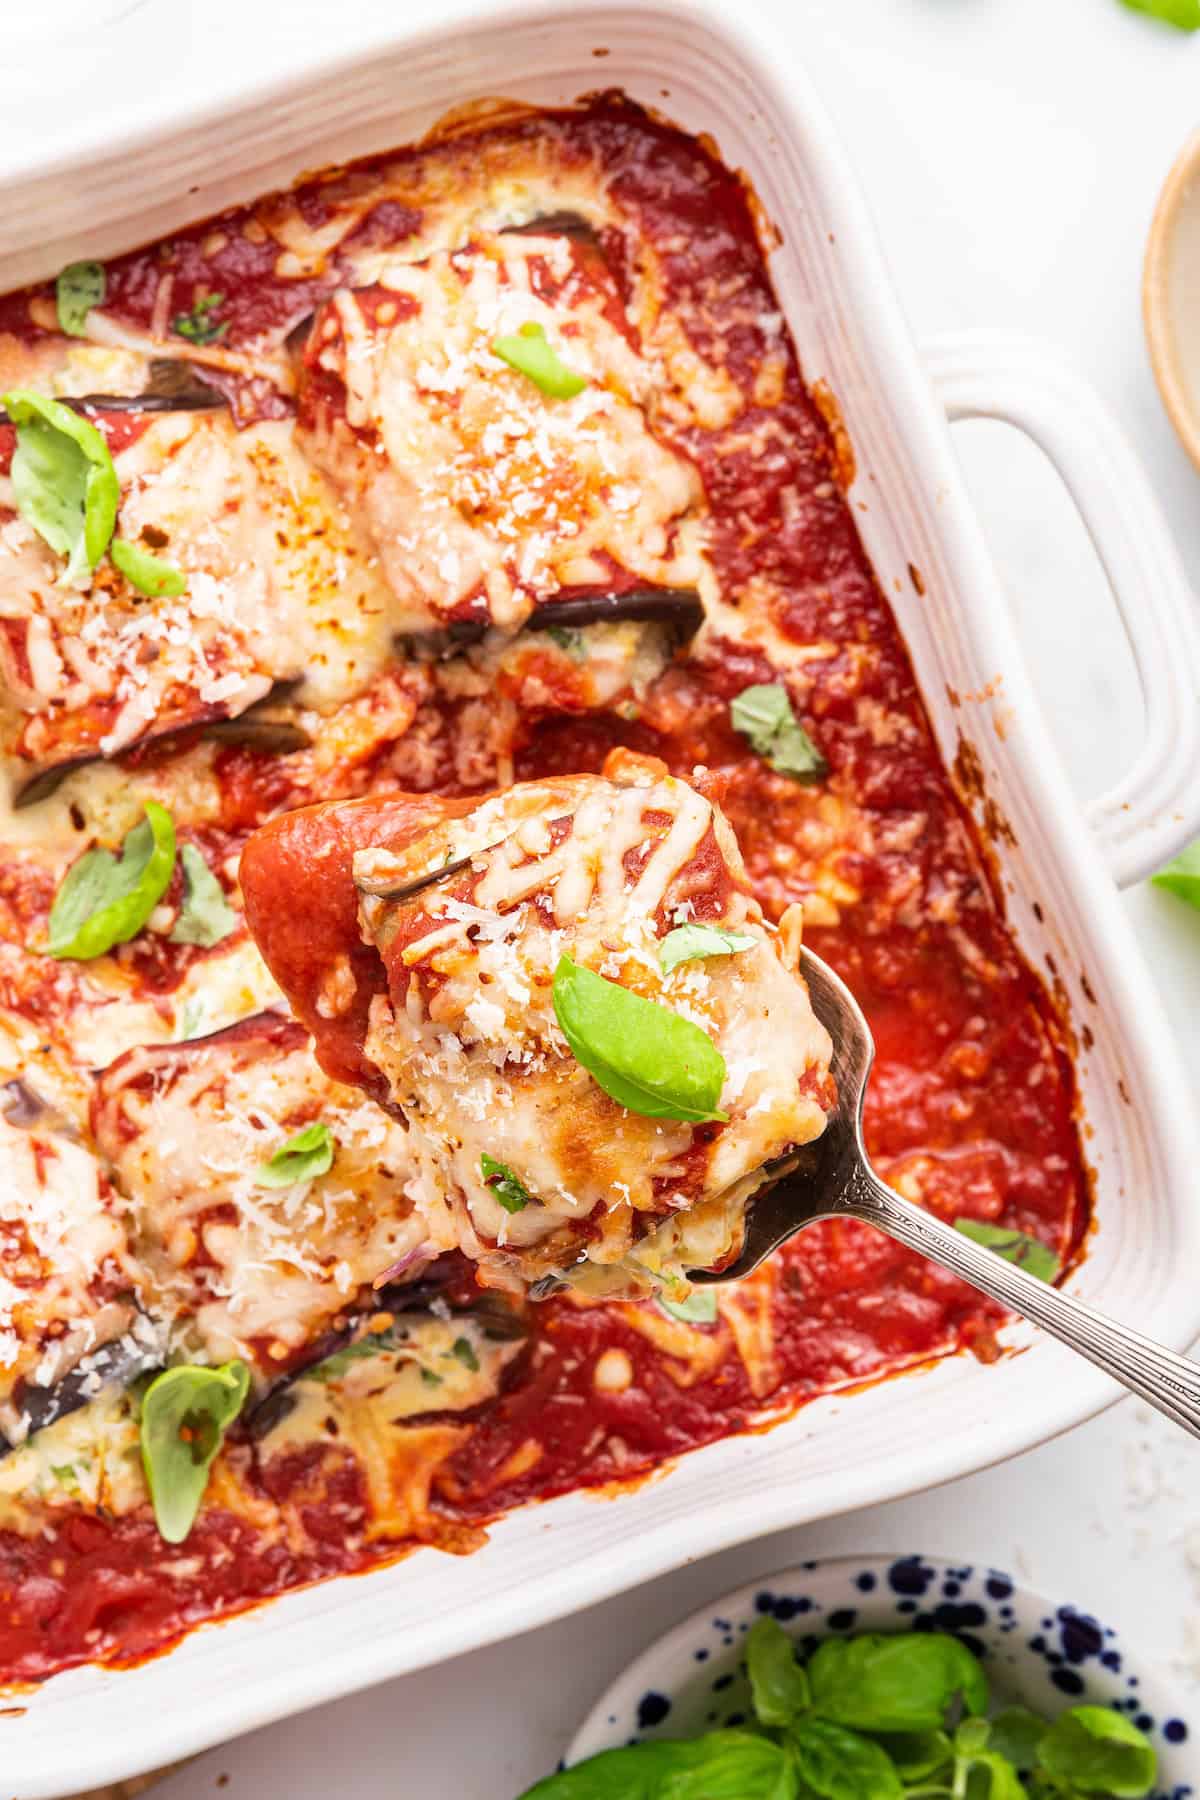 Overhead view of spoon lifting eggplant rollatini from baking dish